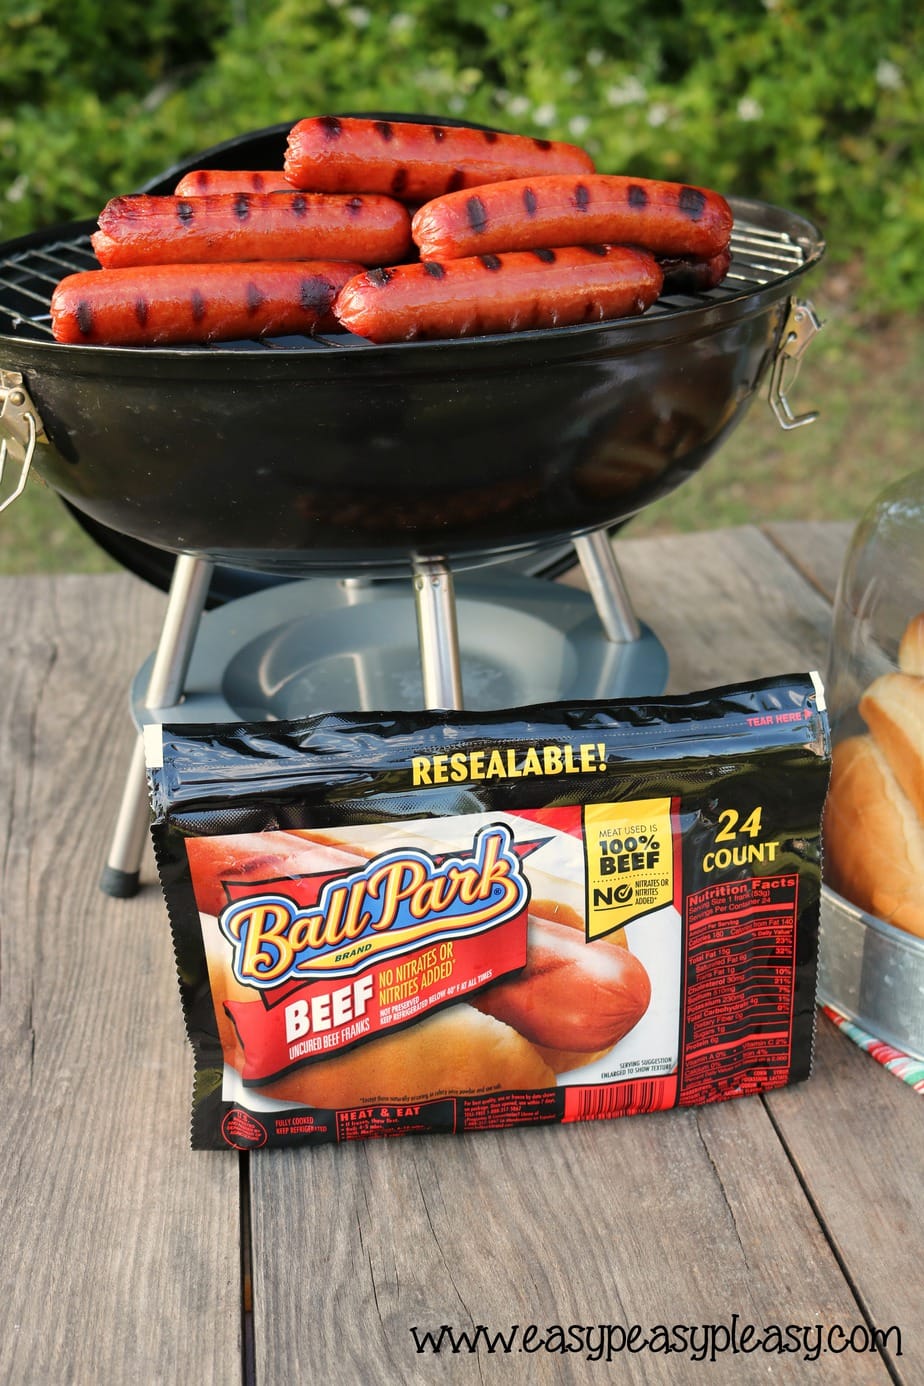 Swing by Sam's and pick up a huge package of Ball Park Hot dogs to keep on hand for those impromptu backyard cookouts this summer.